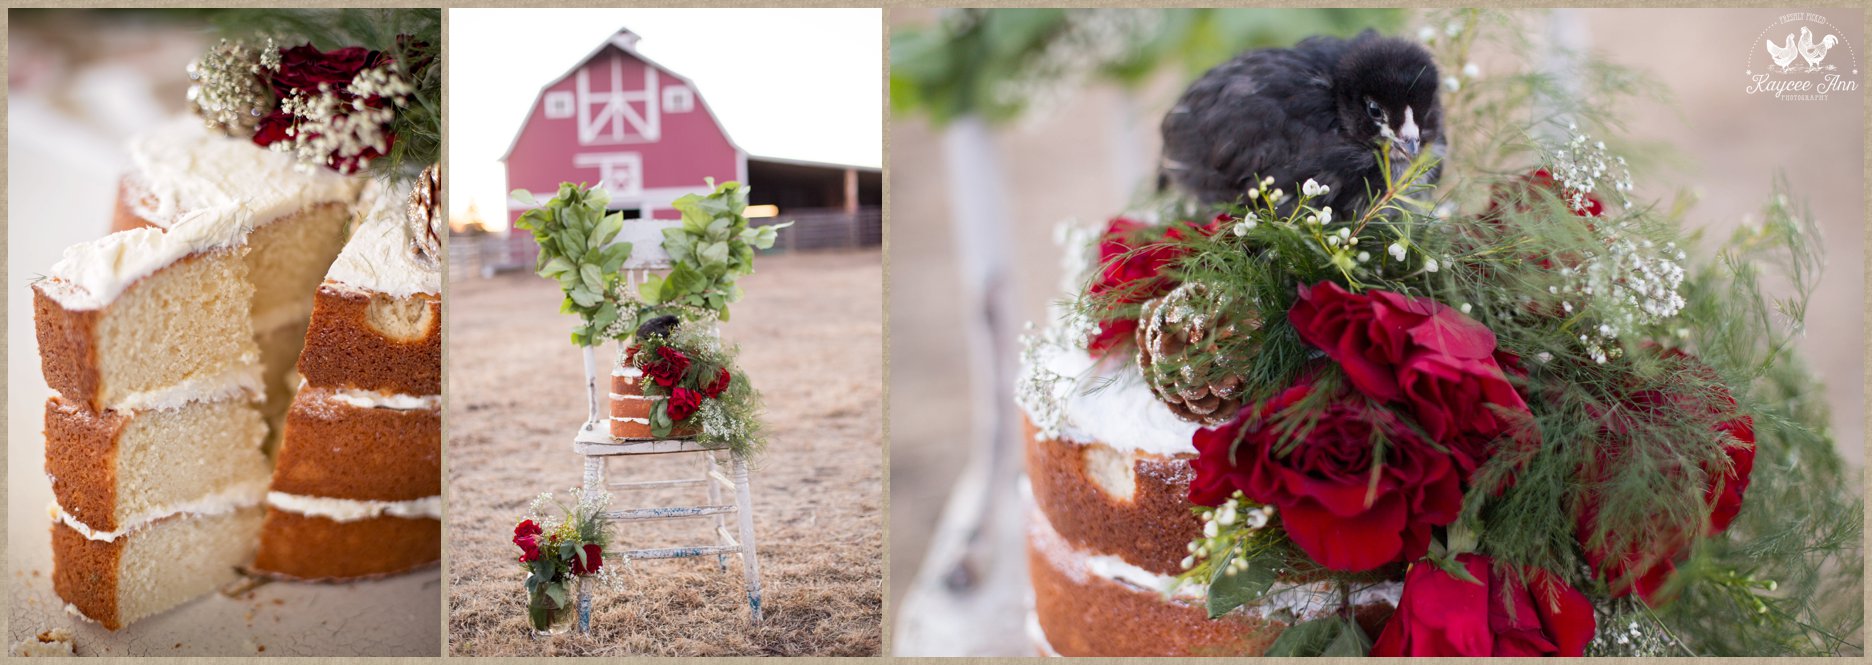 naked rustic cake airdrie